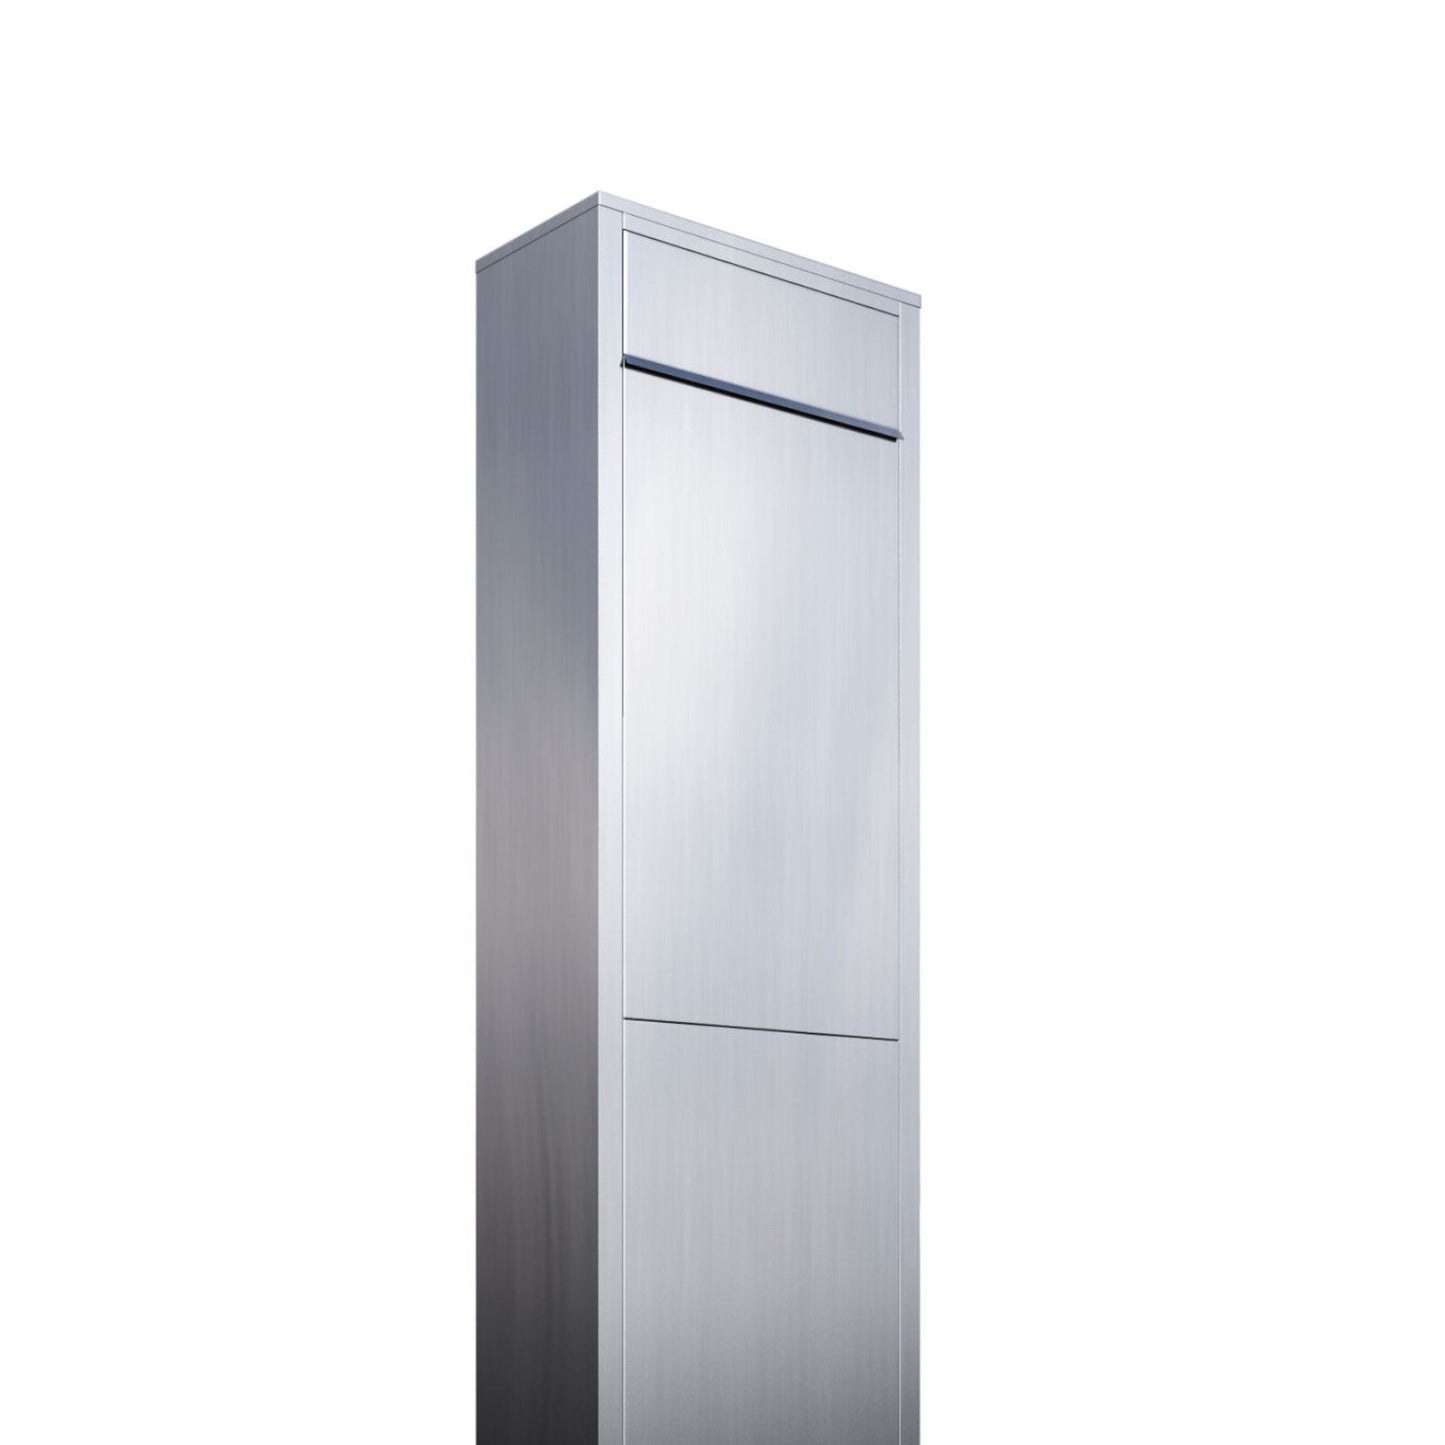 BIG BOX by Bravios - Modern stand-alone mailbox in stainless steel